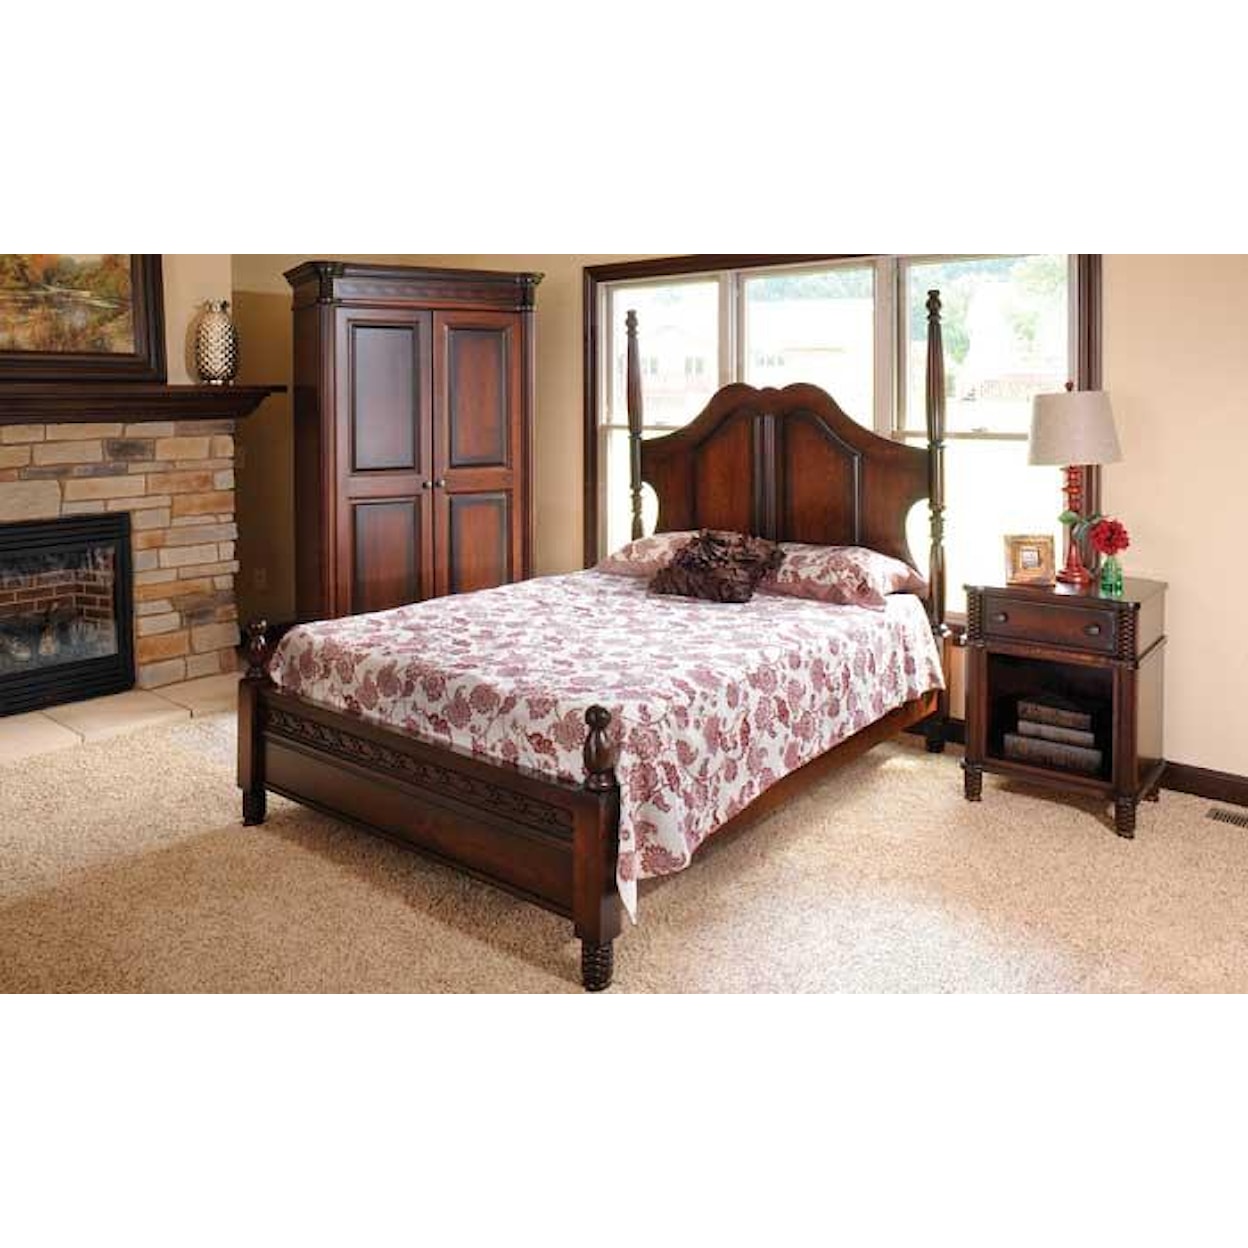 The Urban Collection New Generations California King Bedroom Group